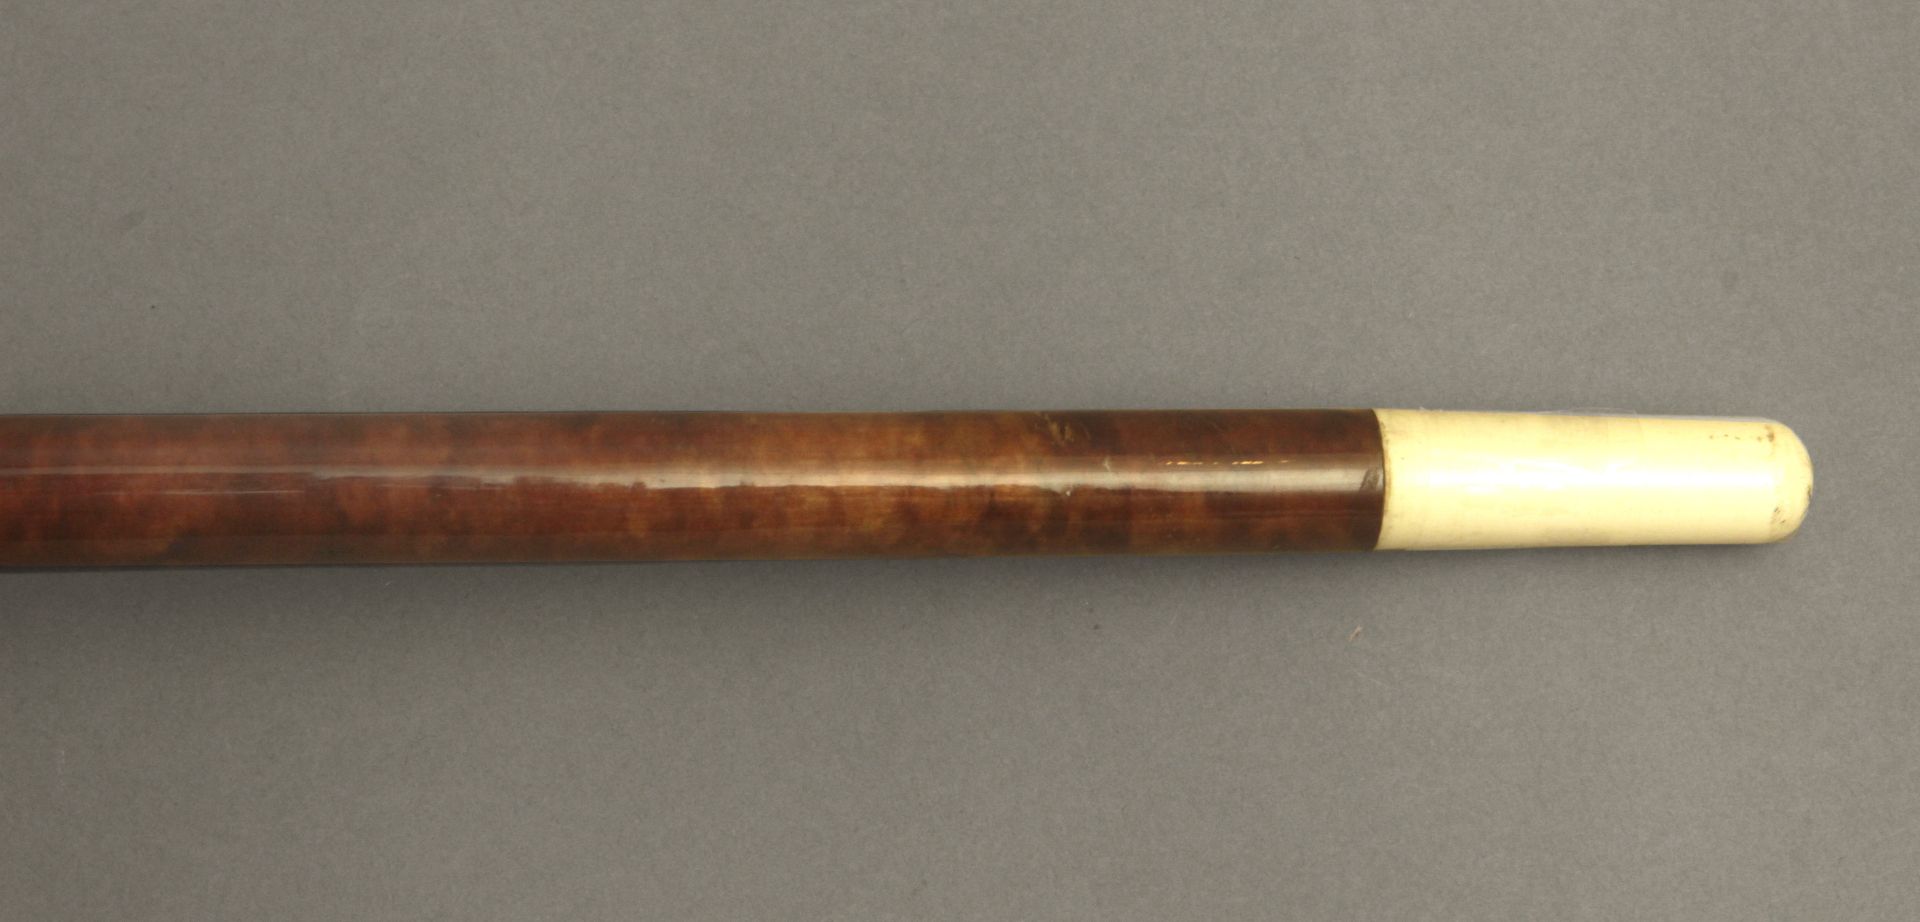 A first half of 20th century ivory handled dress cane - Image 6 of 6